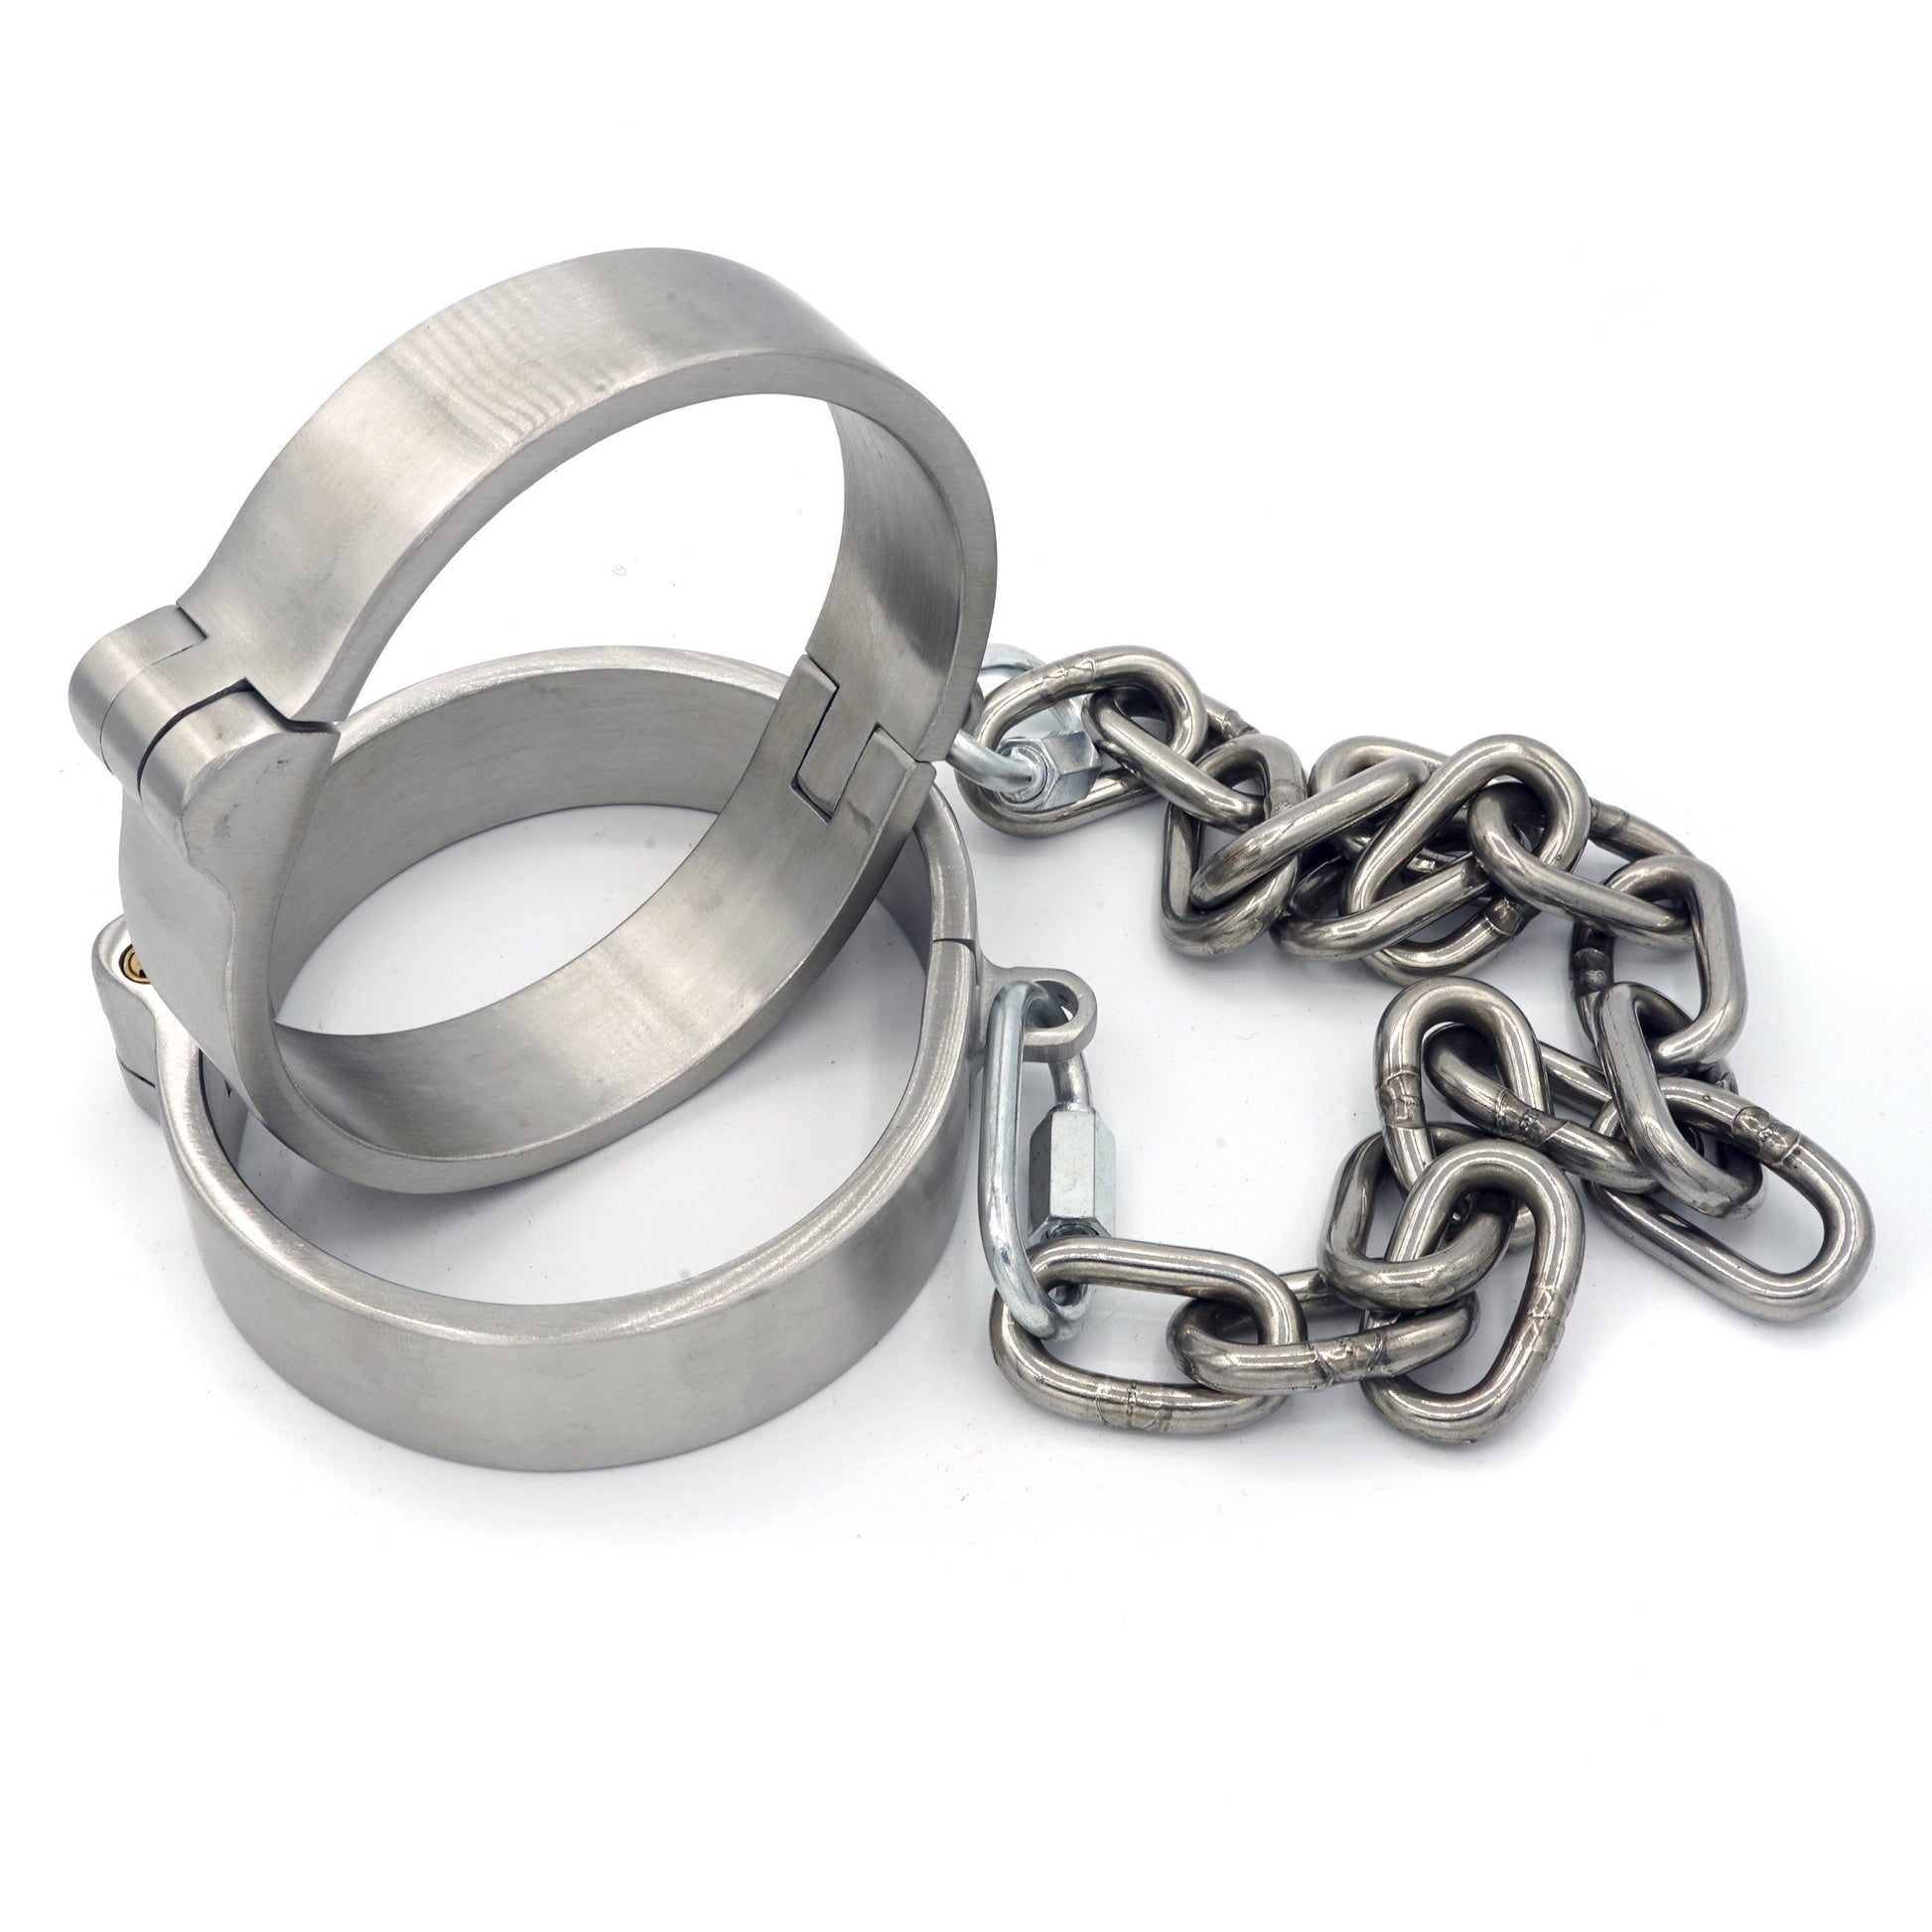 Heavy stainless steel leg irons with chain, lockable